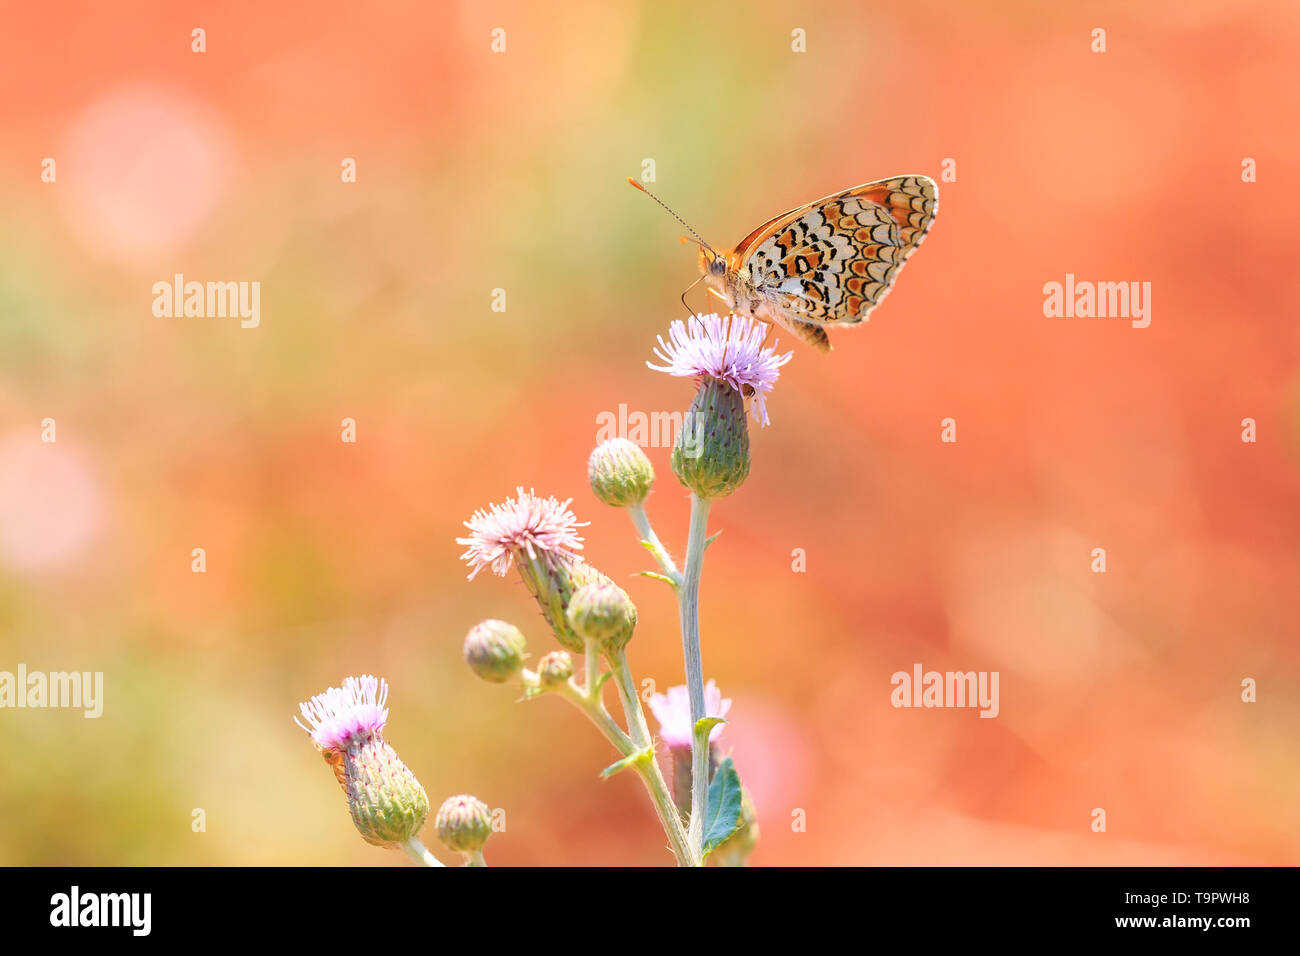 Closeup of a knapweed fritillary, Melitaea phoebe, butterfly resting and pollinating in bright sunlight. Stock Photo